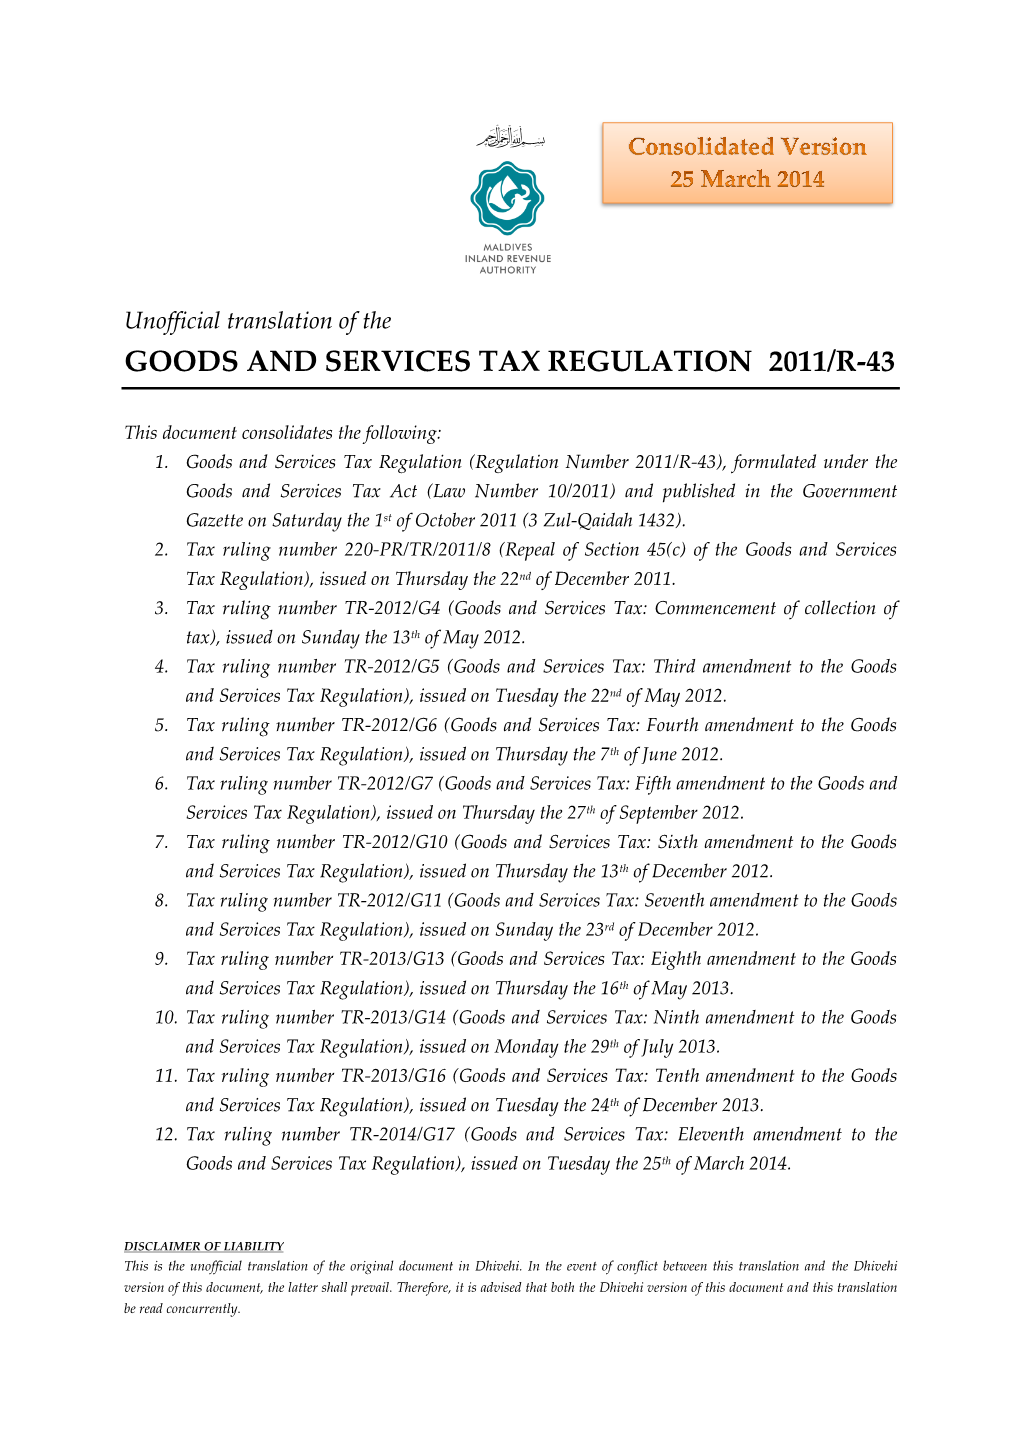 Goods and Services Tax Regulation 2011/R-43